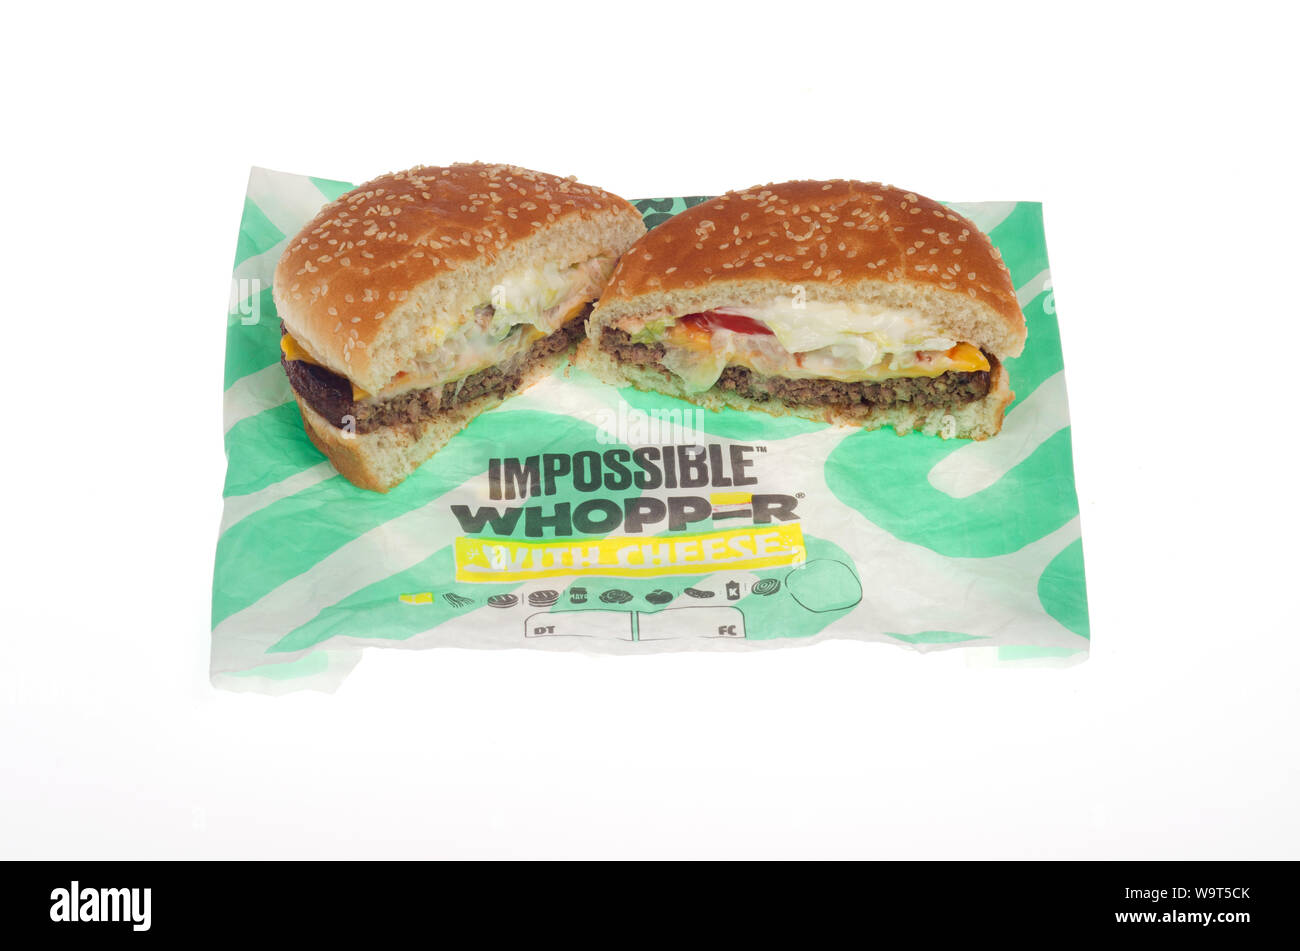 Burger King Impossible Whopper with cheese cut in half on wrapper showing vegetarian, plant based, meat free sandwich Stock Photo